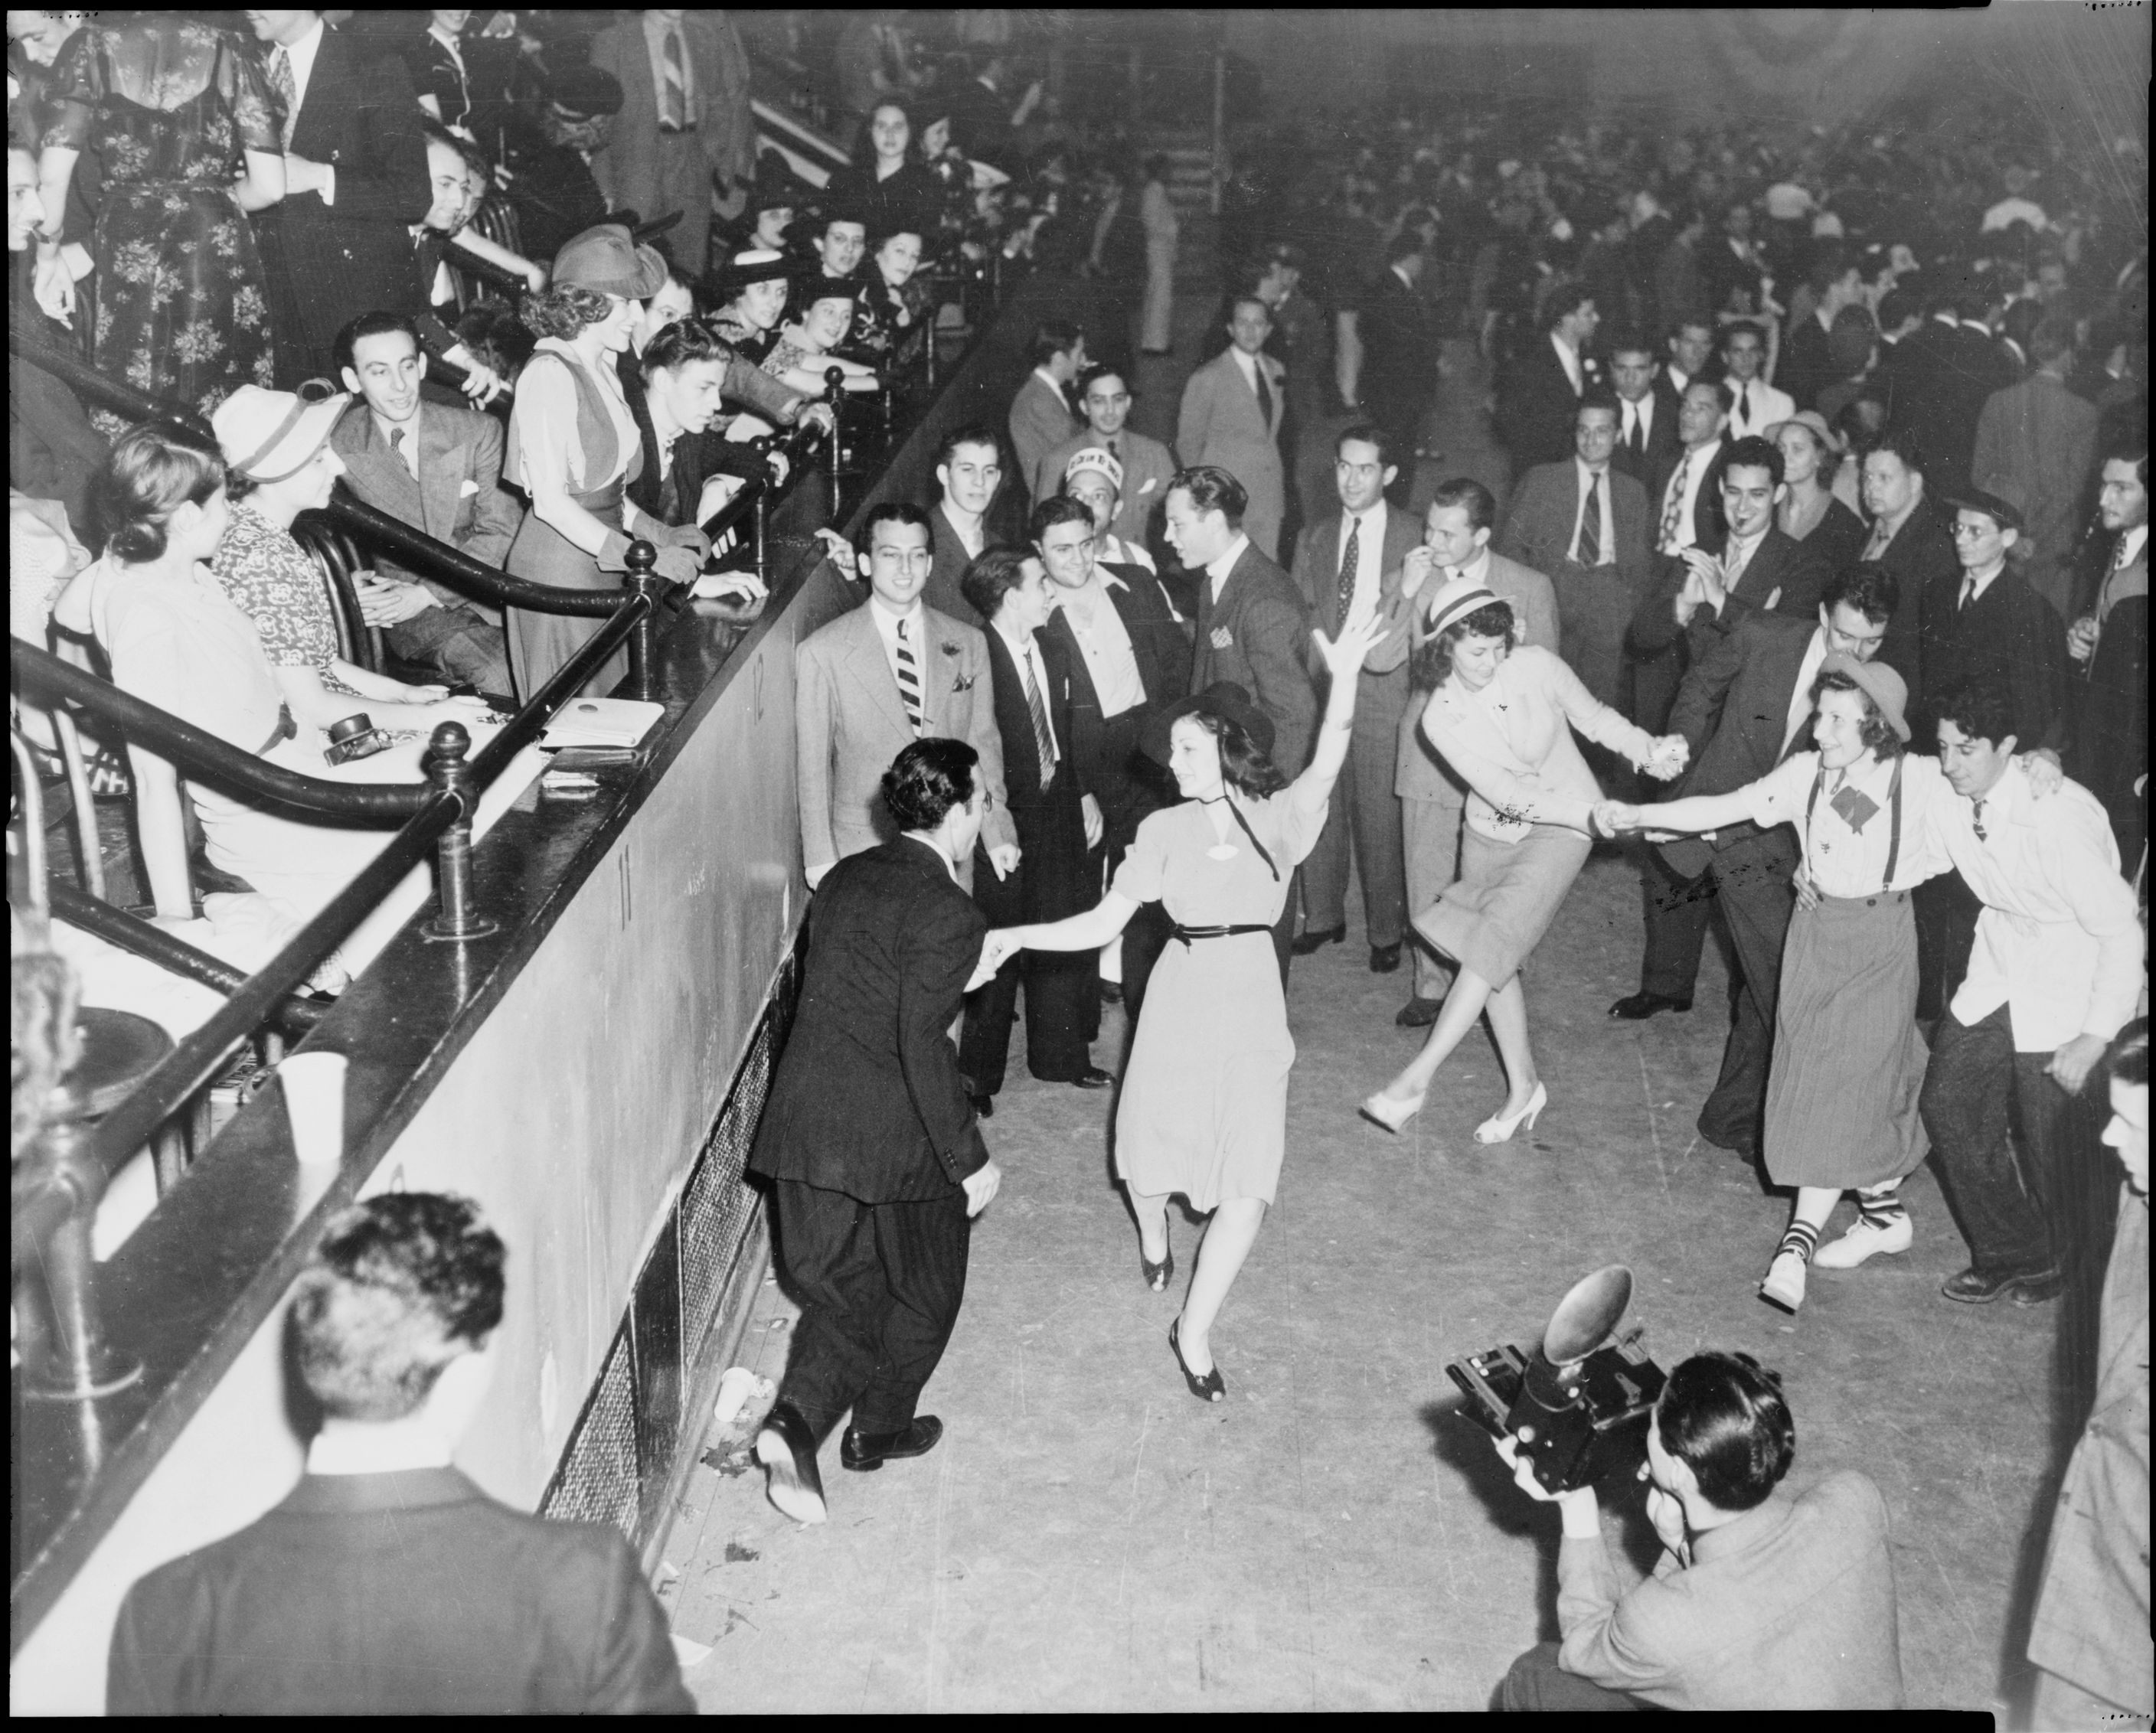 Why Men in the 1920s Paid Women for Spins Around the Dance Hall pic